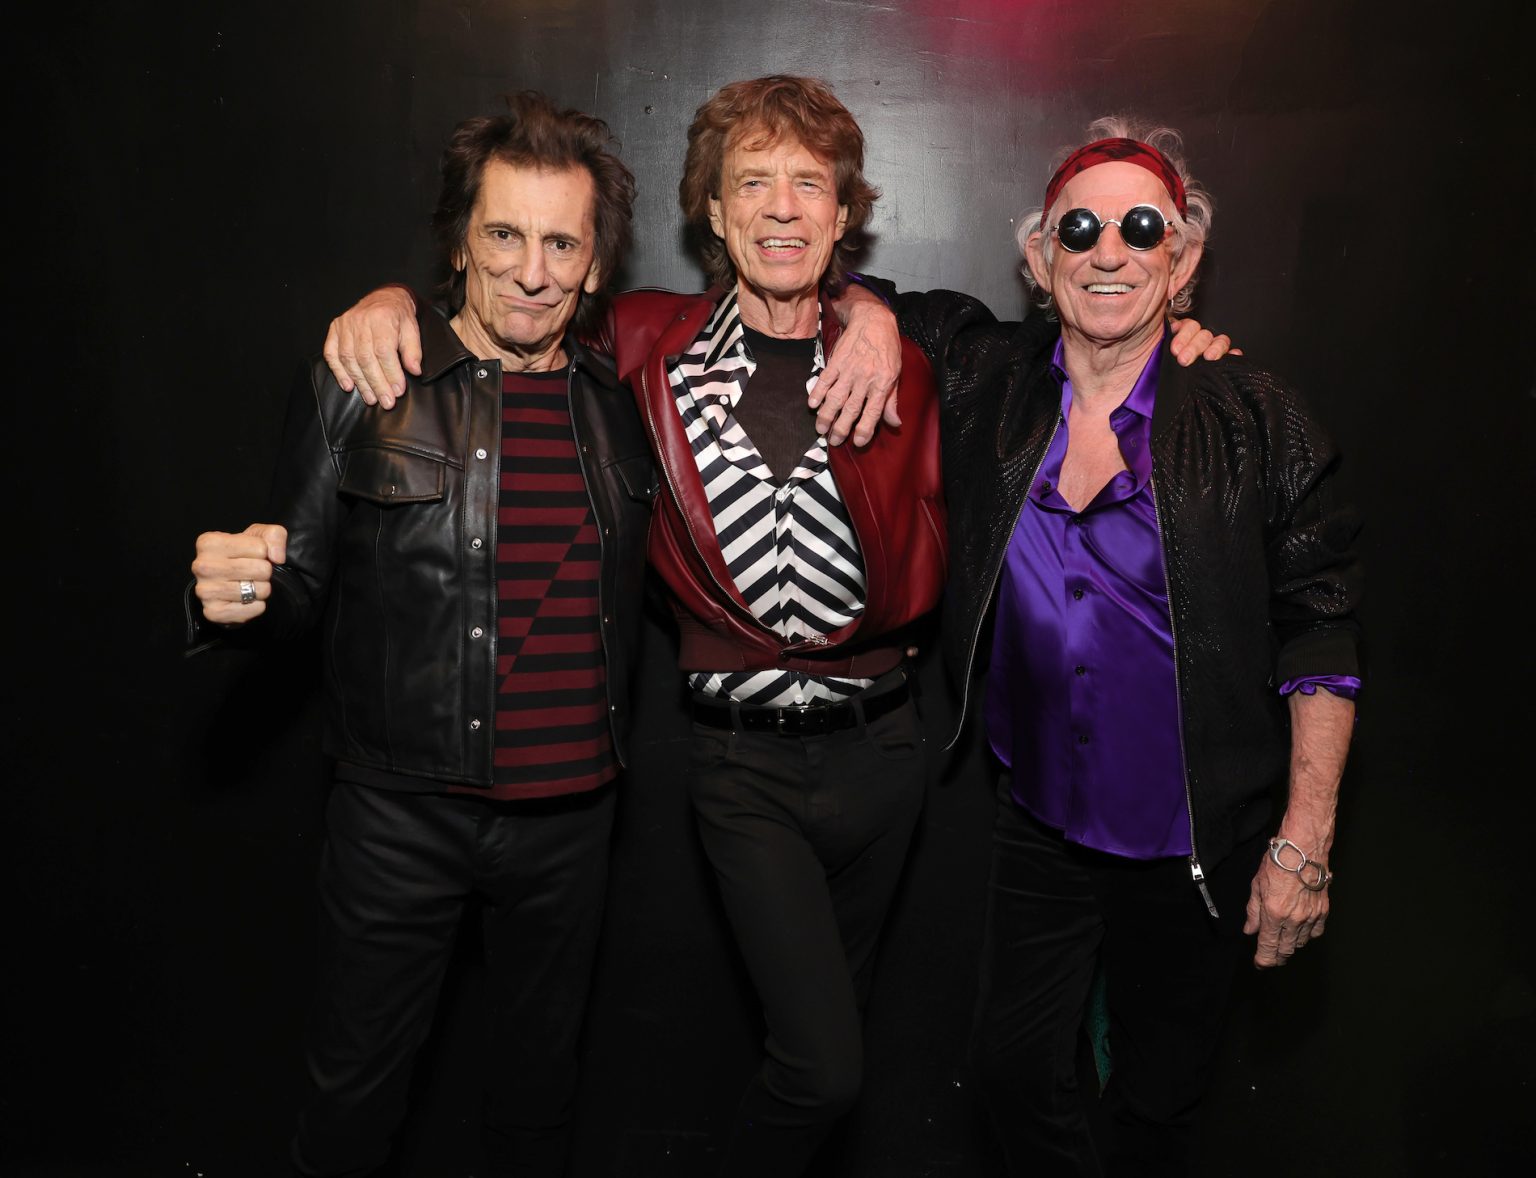 Club Portrait Shot CREDIT Kevin Mazur Getty Images For The Rolling Stones 1536x1178 